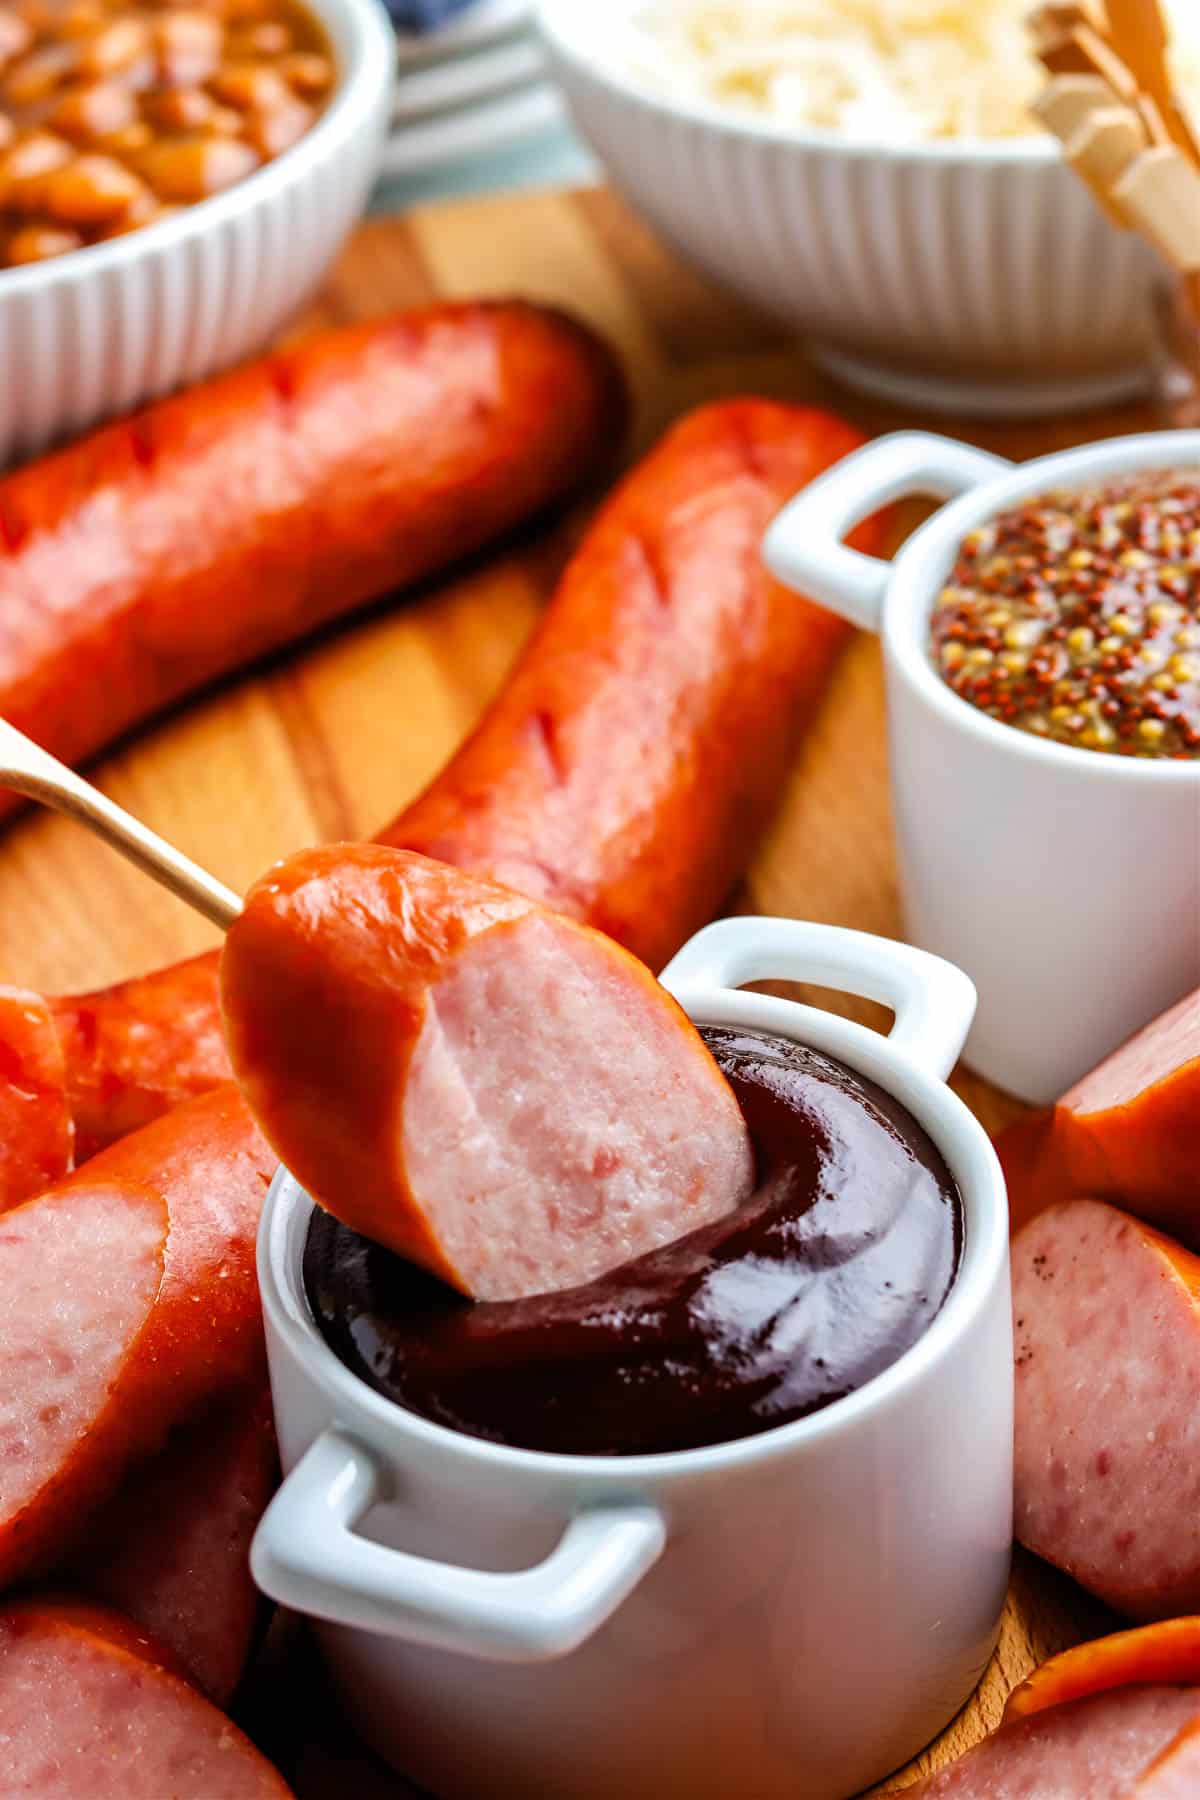 A piece of the finished Smoked Kielbasa recipe dipped into sauce.